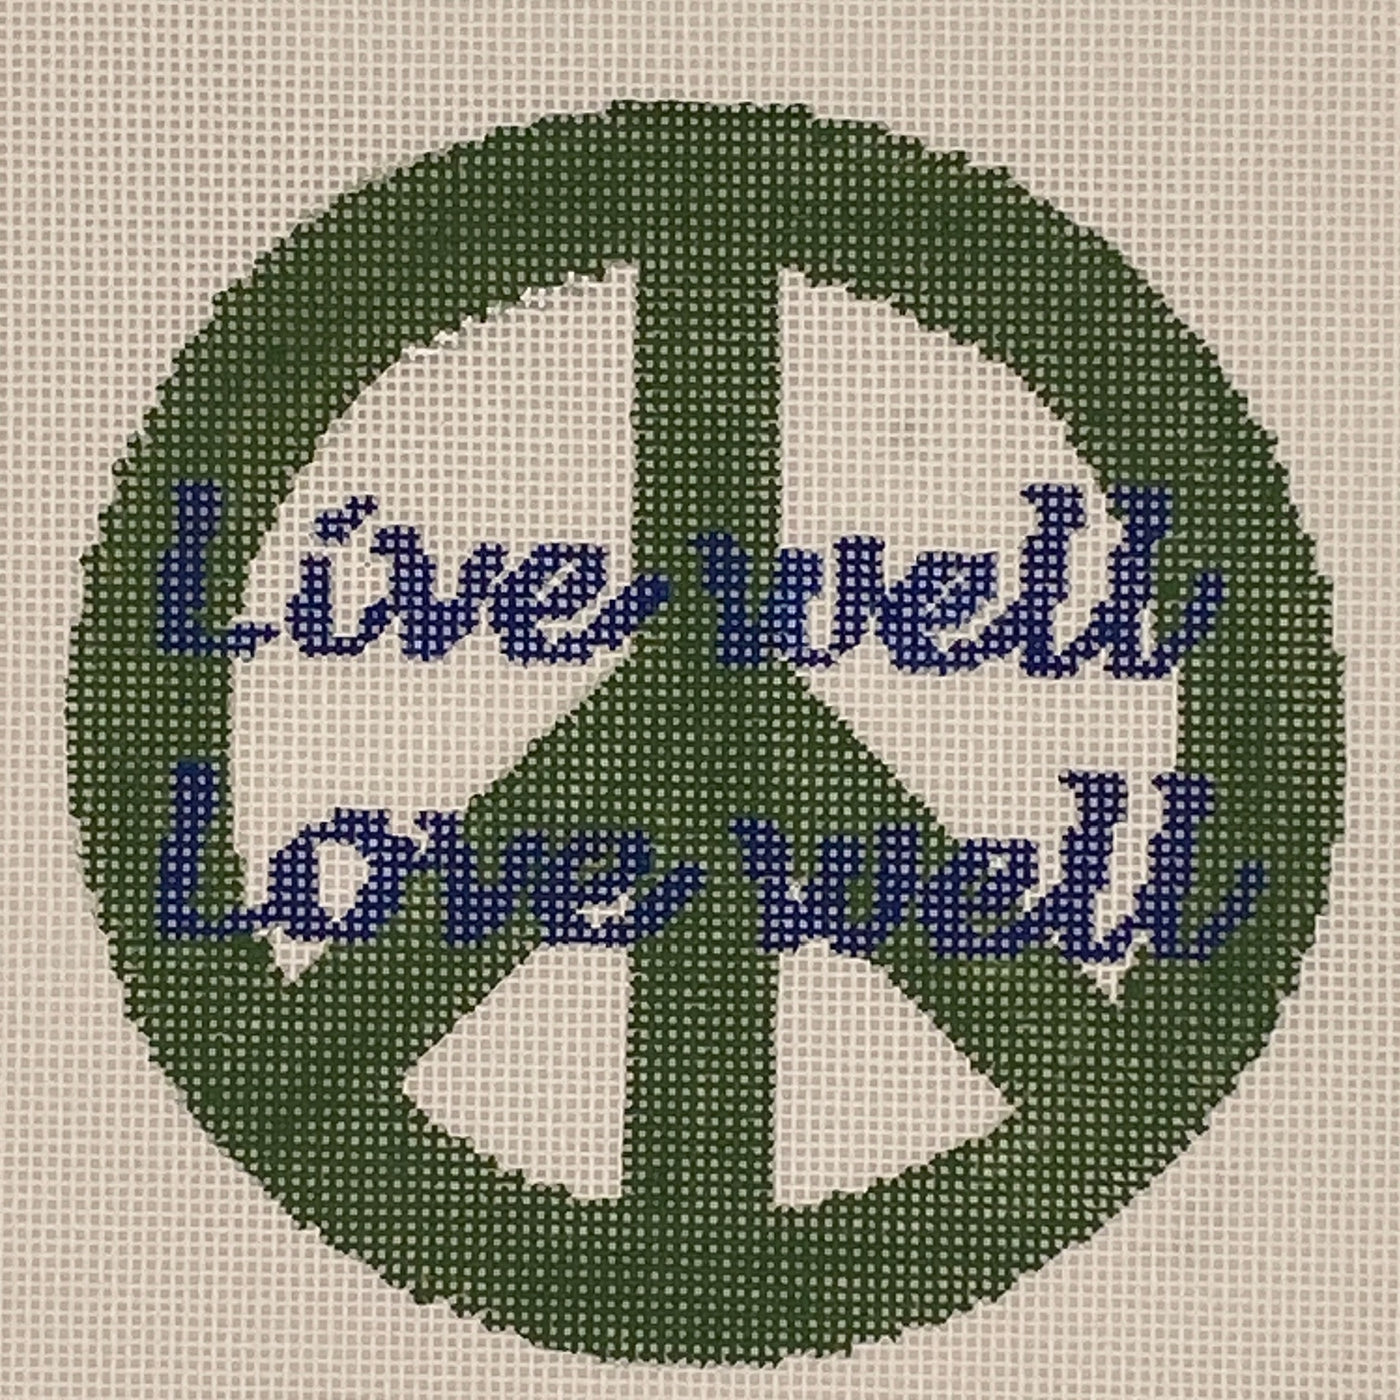 Live Well Love Well. Inspirational words from a favorite instructor. Bargello Nedlepoint's exclusive "Words to Live By" handpainted needlepoint canvas series.